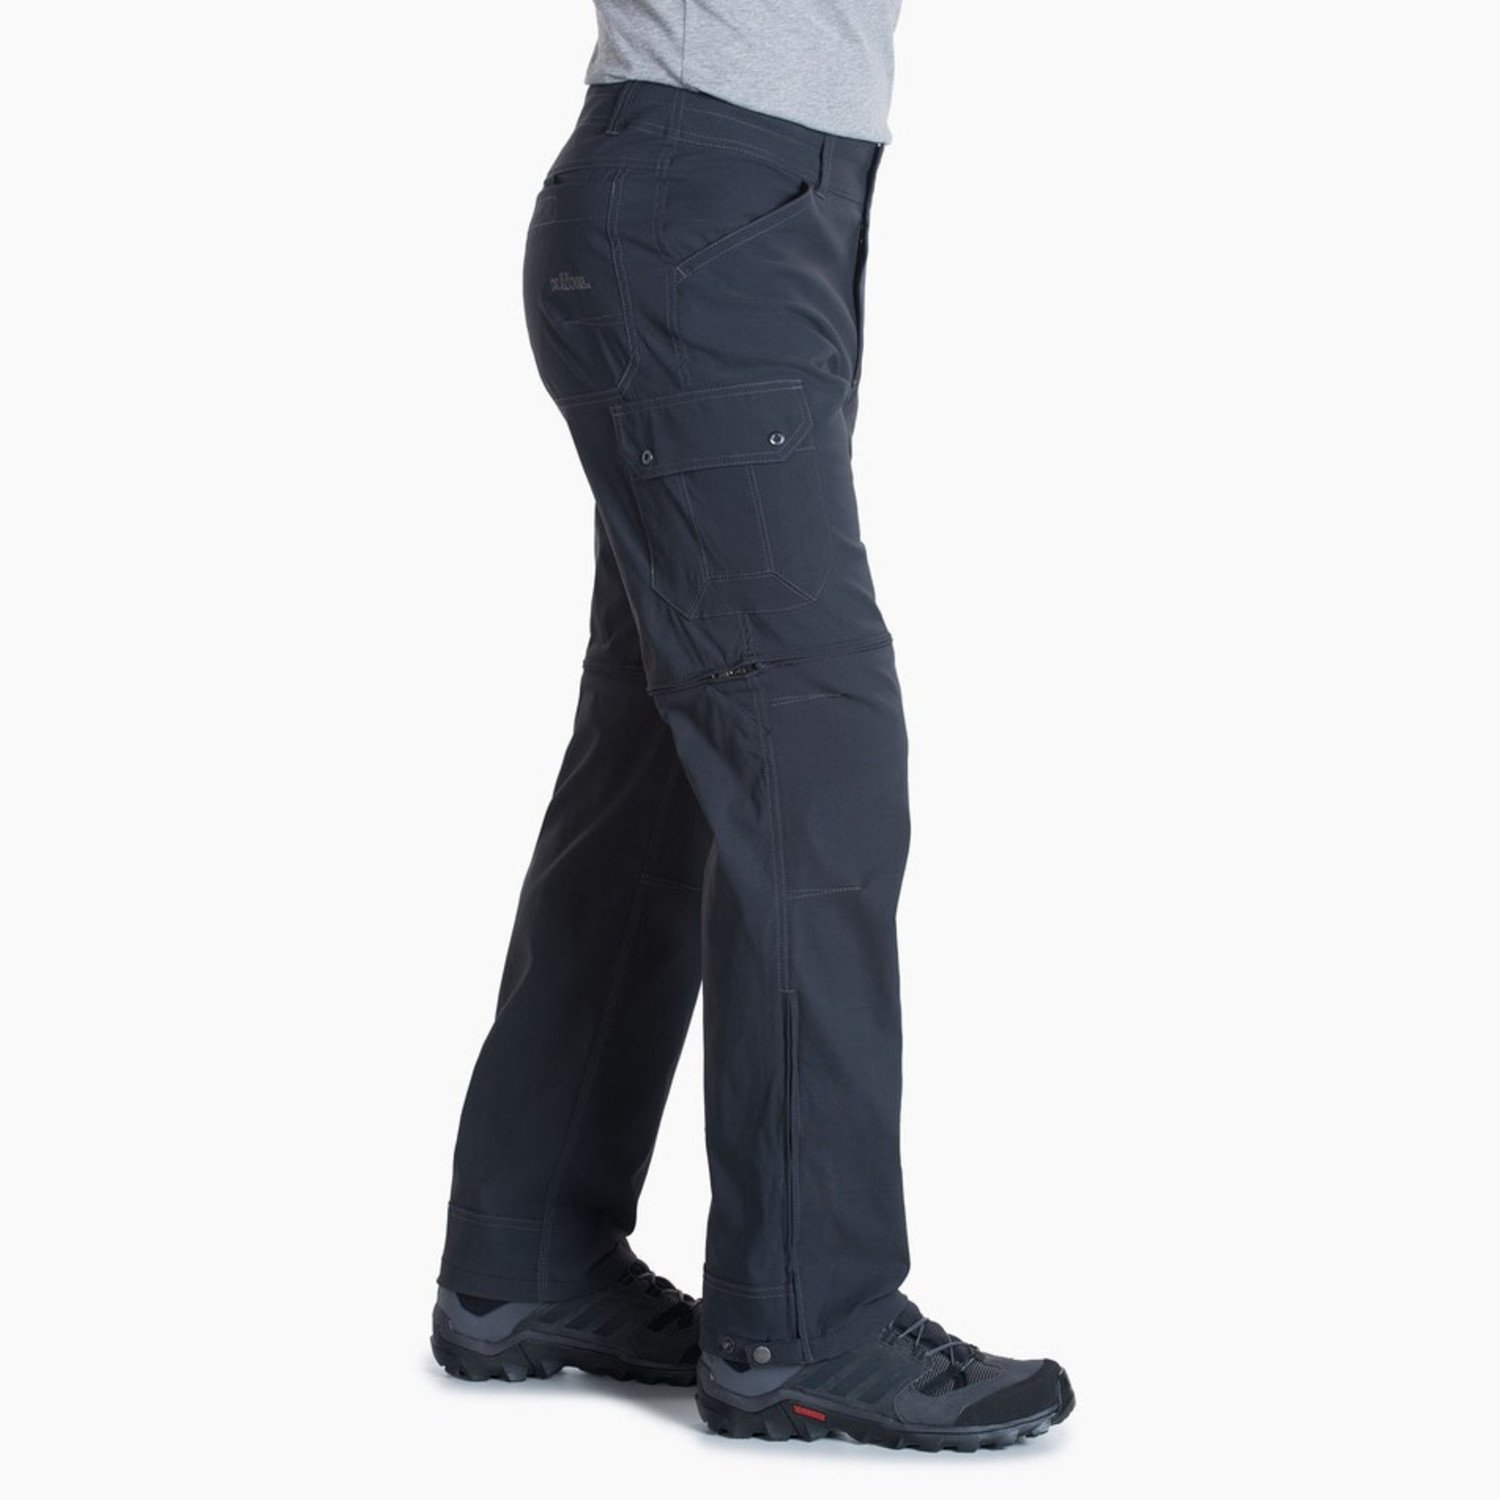 Kuhl Frost Softshell Pants, 32 Inseam - Womens, FREE SHIPPING in Canada